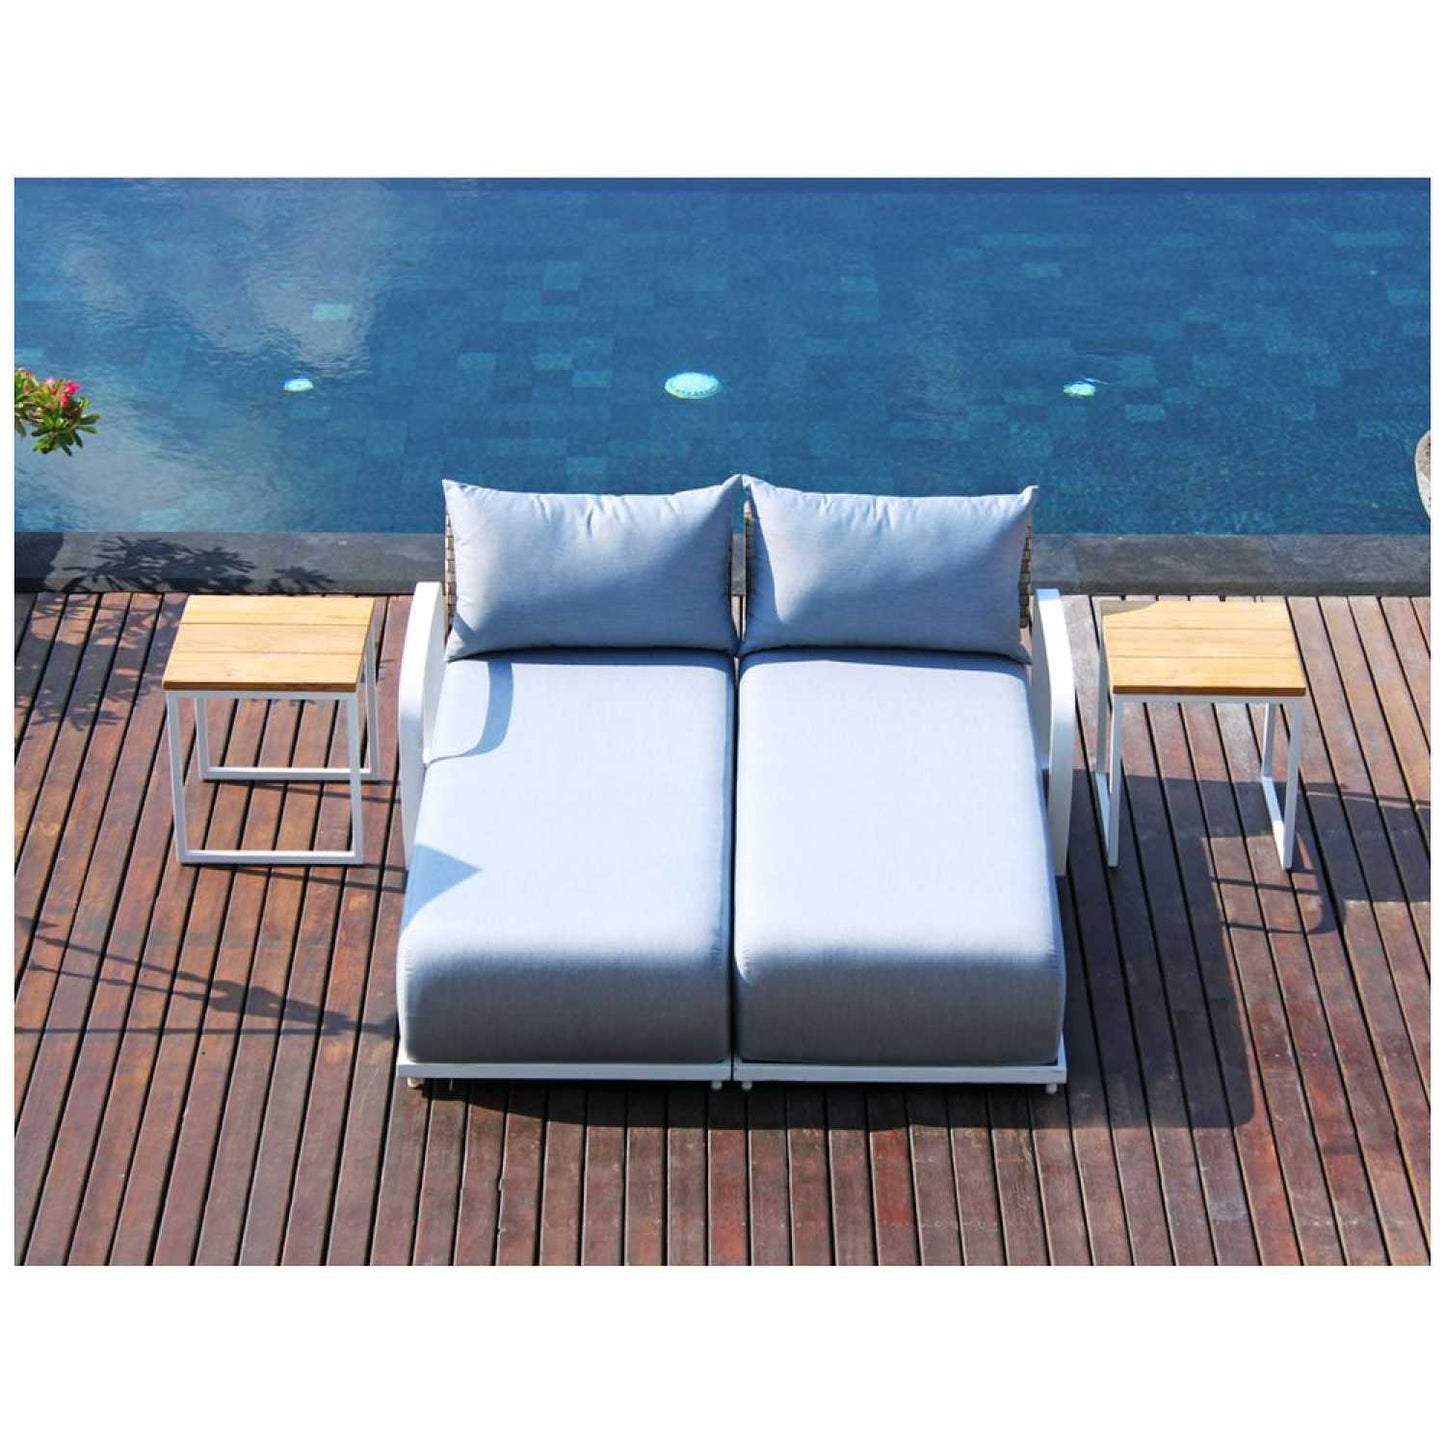 Windsor White Chaise with Nautic Square Side Table - PadioLiving - Windsor White Chaise with Nautic Square Side Table - Outdoor Chaise with Side Table - PadioLiving